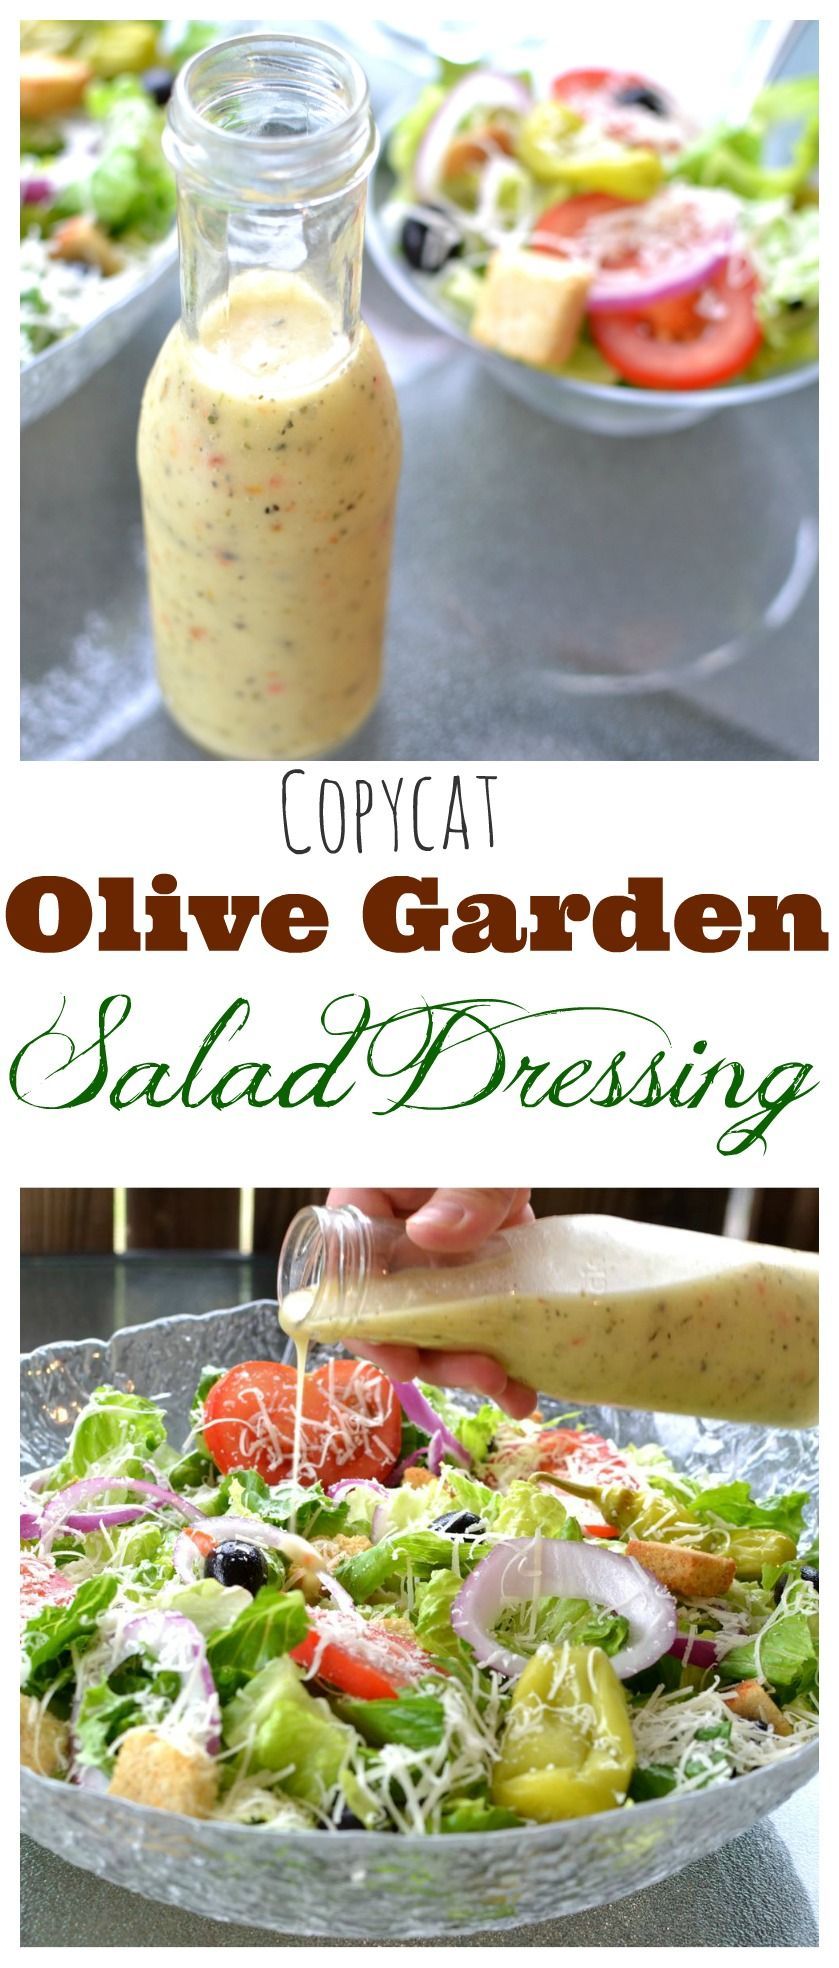 This savory Italian Salad Dressing is so easy to make a home and tastes just like